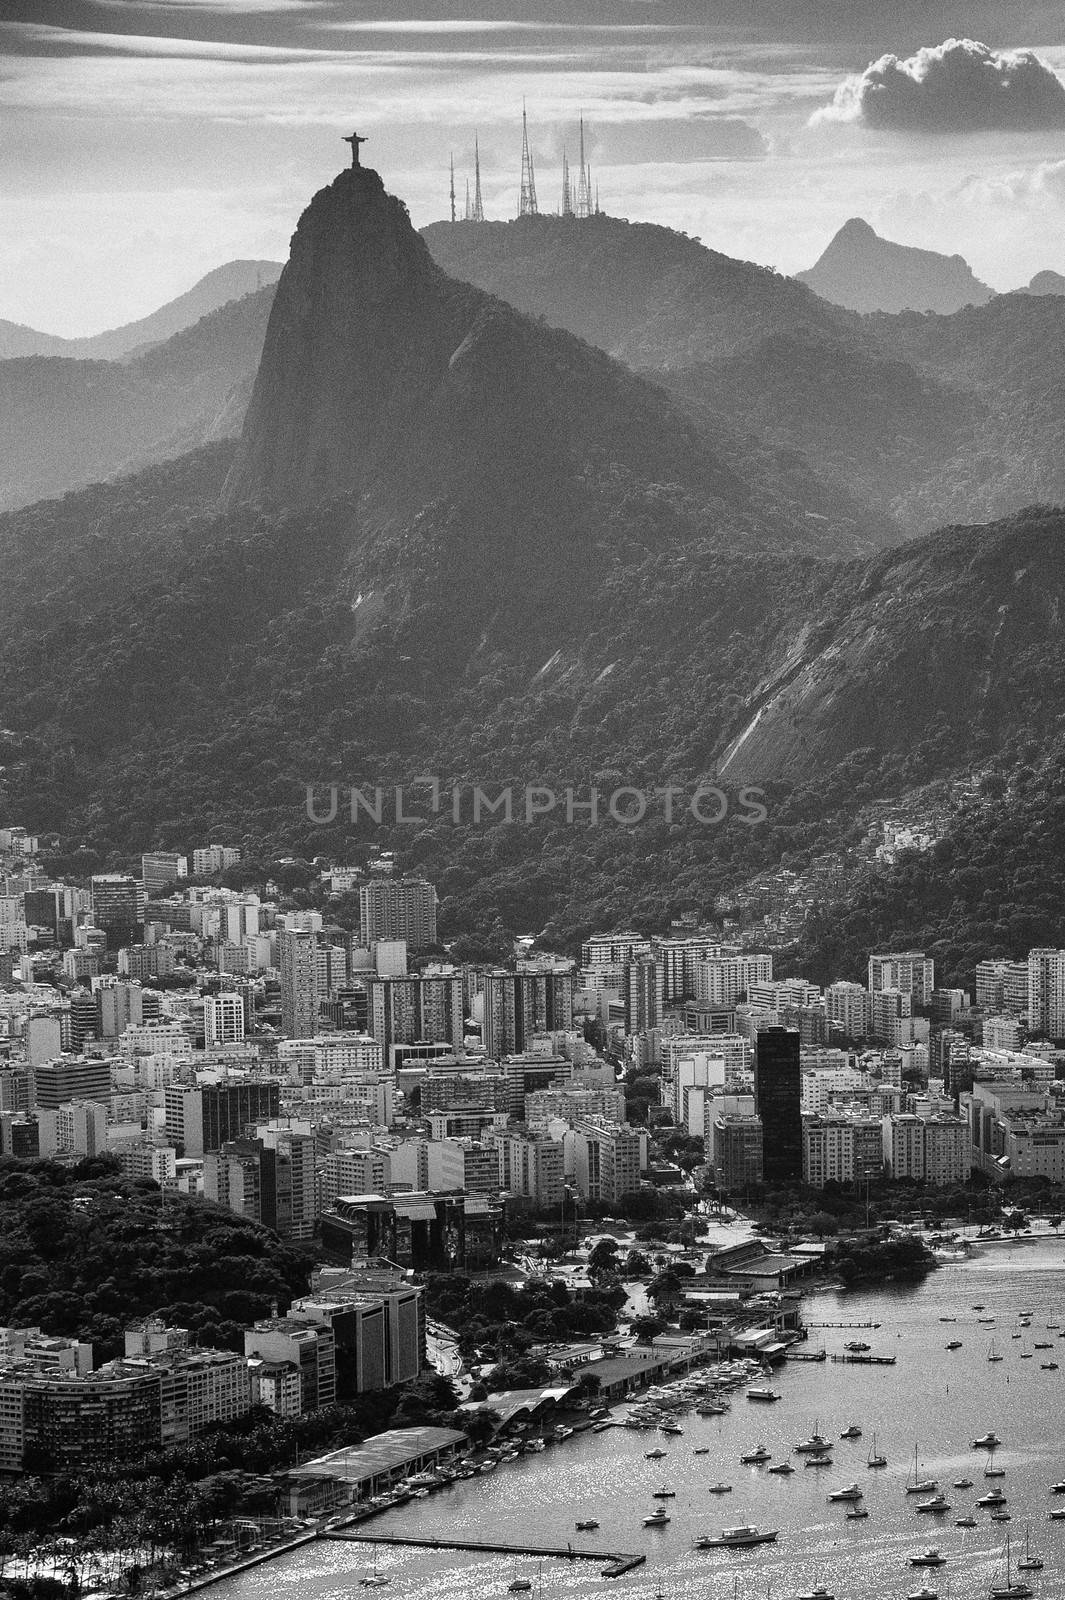 Cityscape with the Christ The Redeemer statue in the background, Corcovado, Rio de Janeiro, Brazil